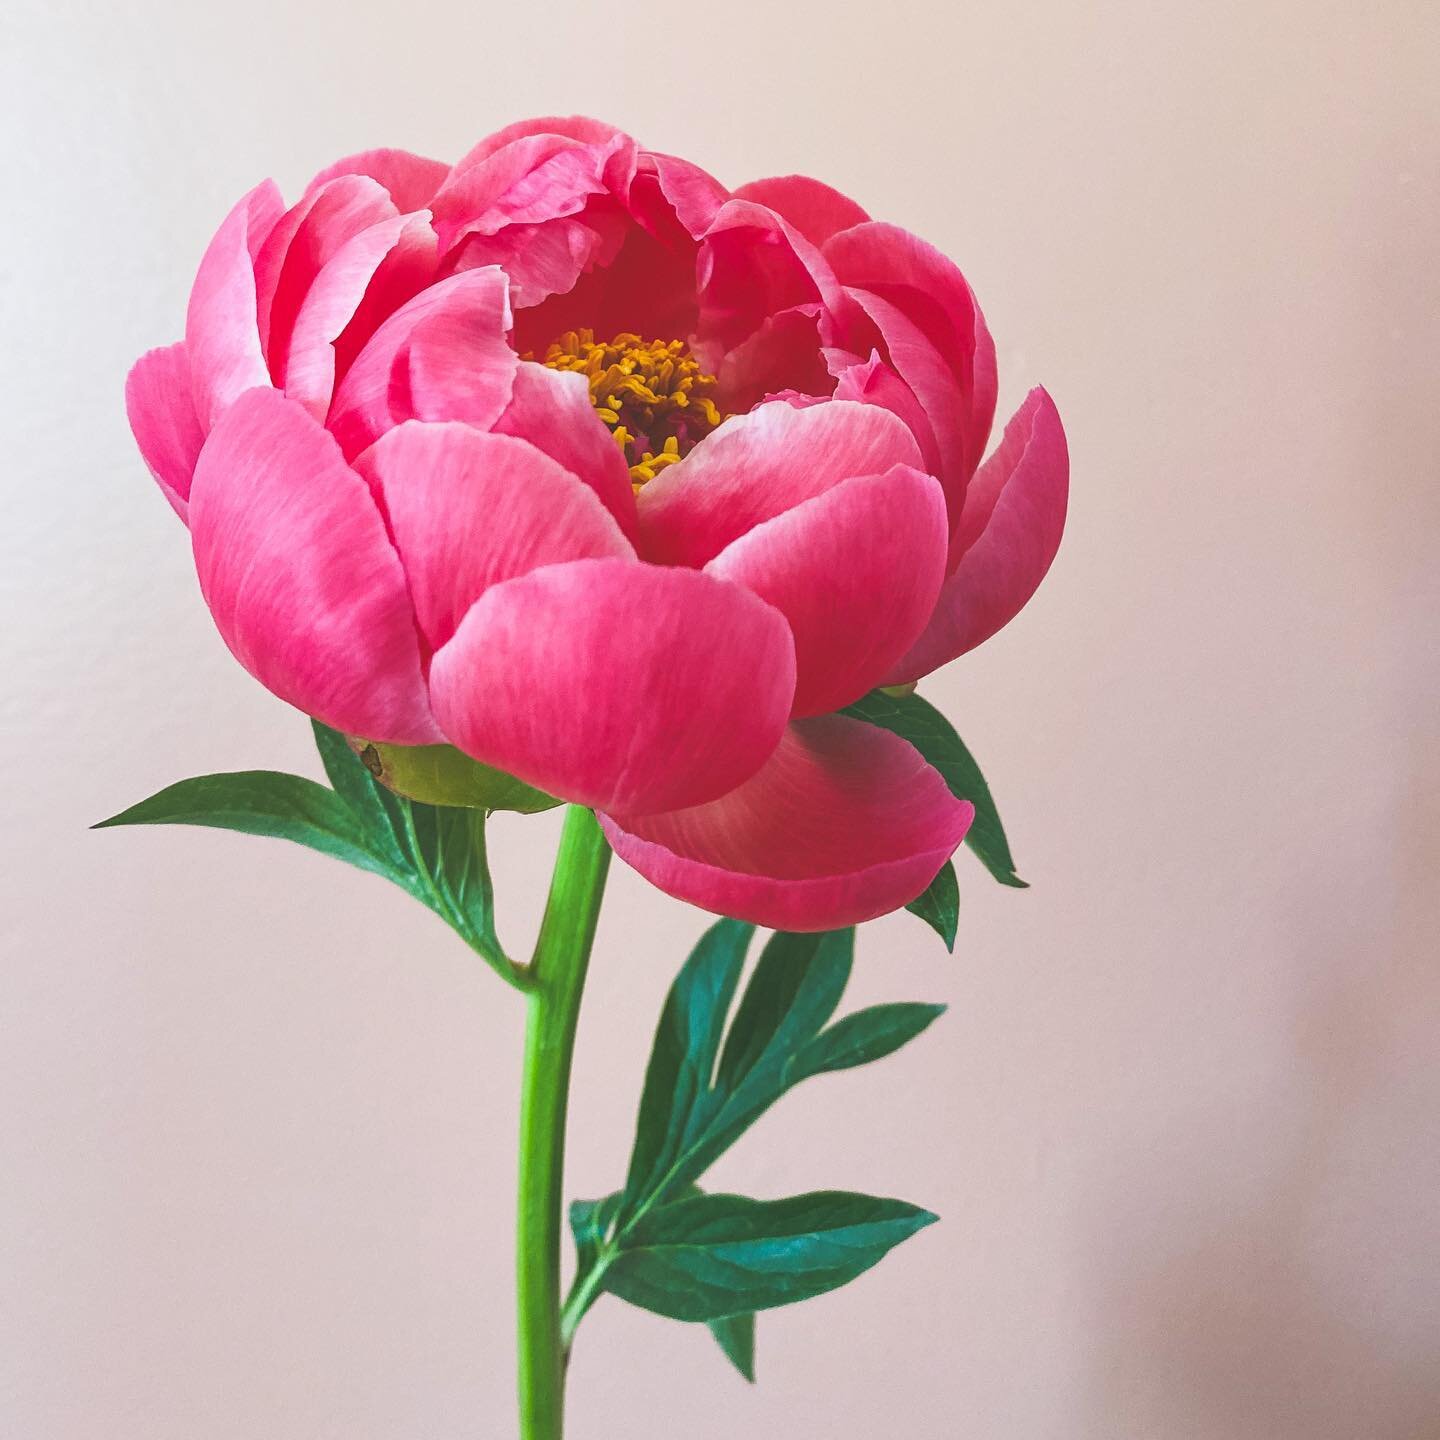 a serious love hate relationship with peonies. they&rsquo;re pretty for sure, but their life span is soo stinking short.
vase life can be 2-4 days, and if you magically get a tad bit longer like i have with this coral charm beauty, count yourself inc